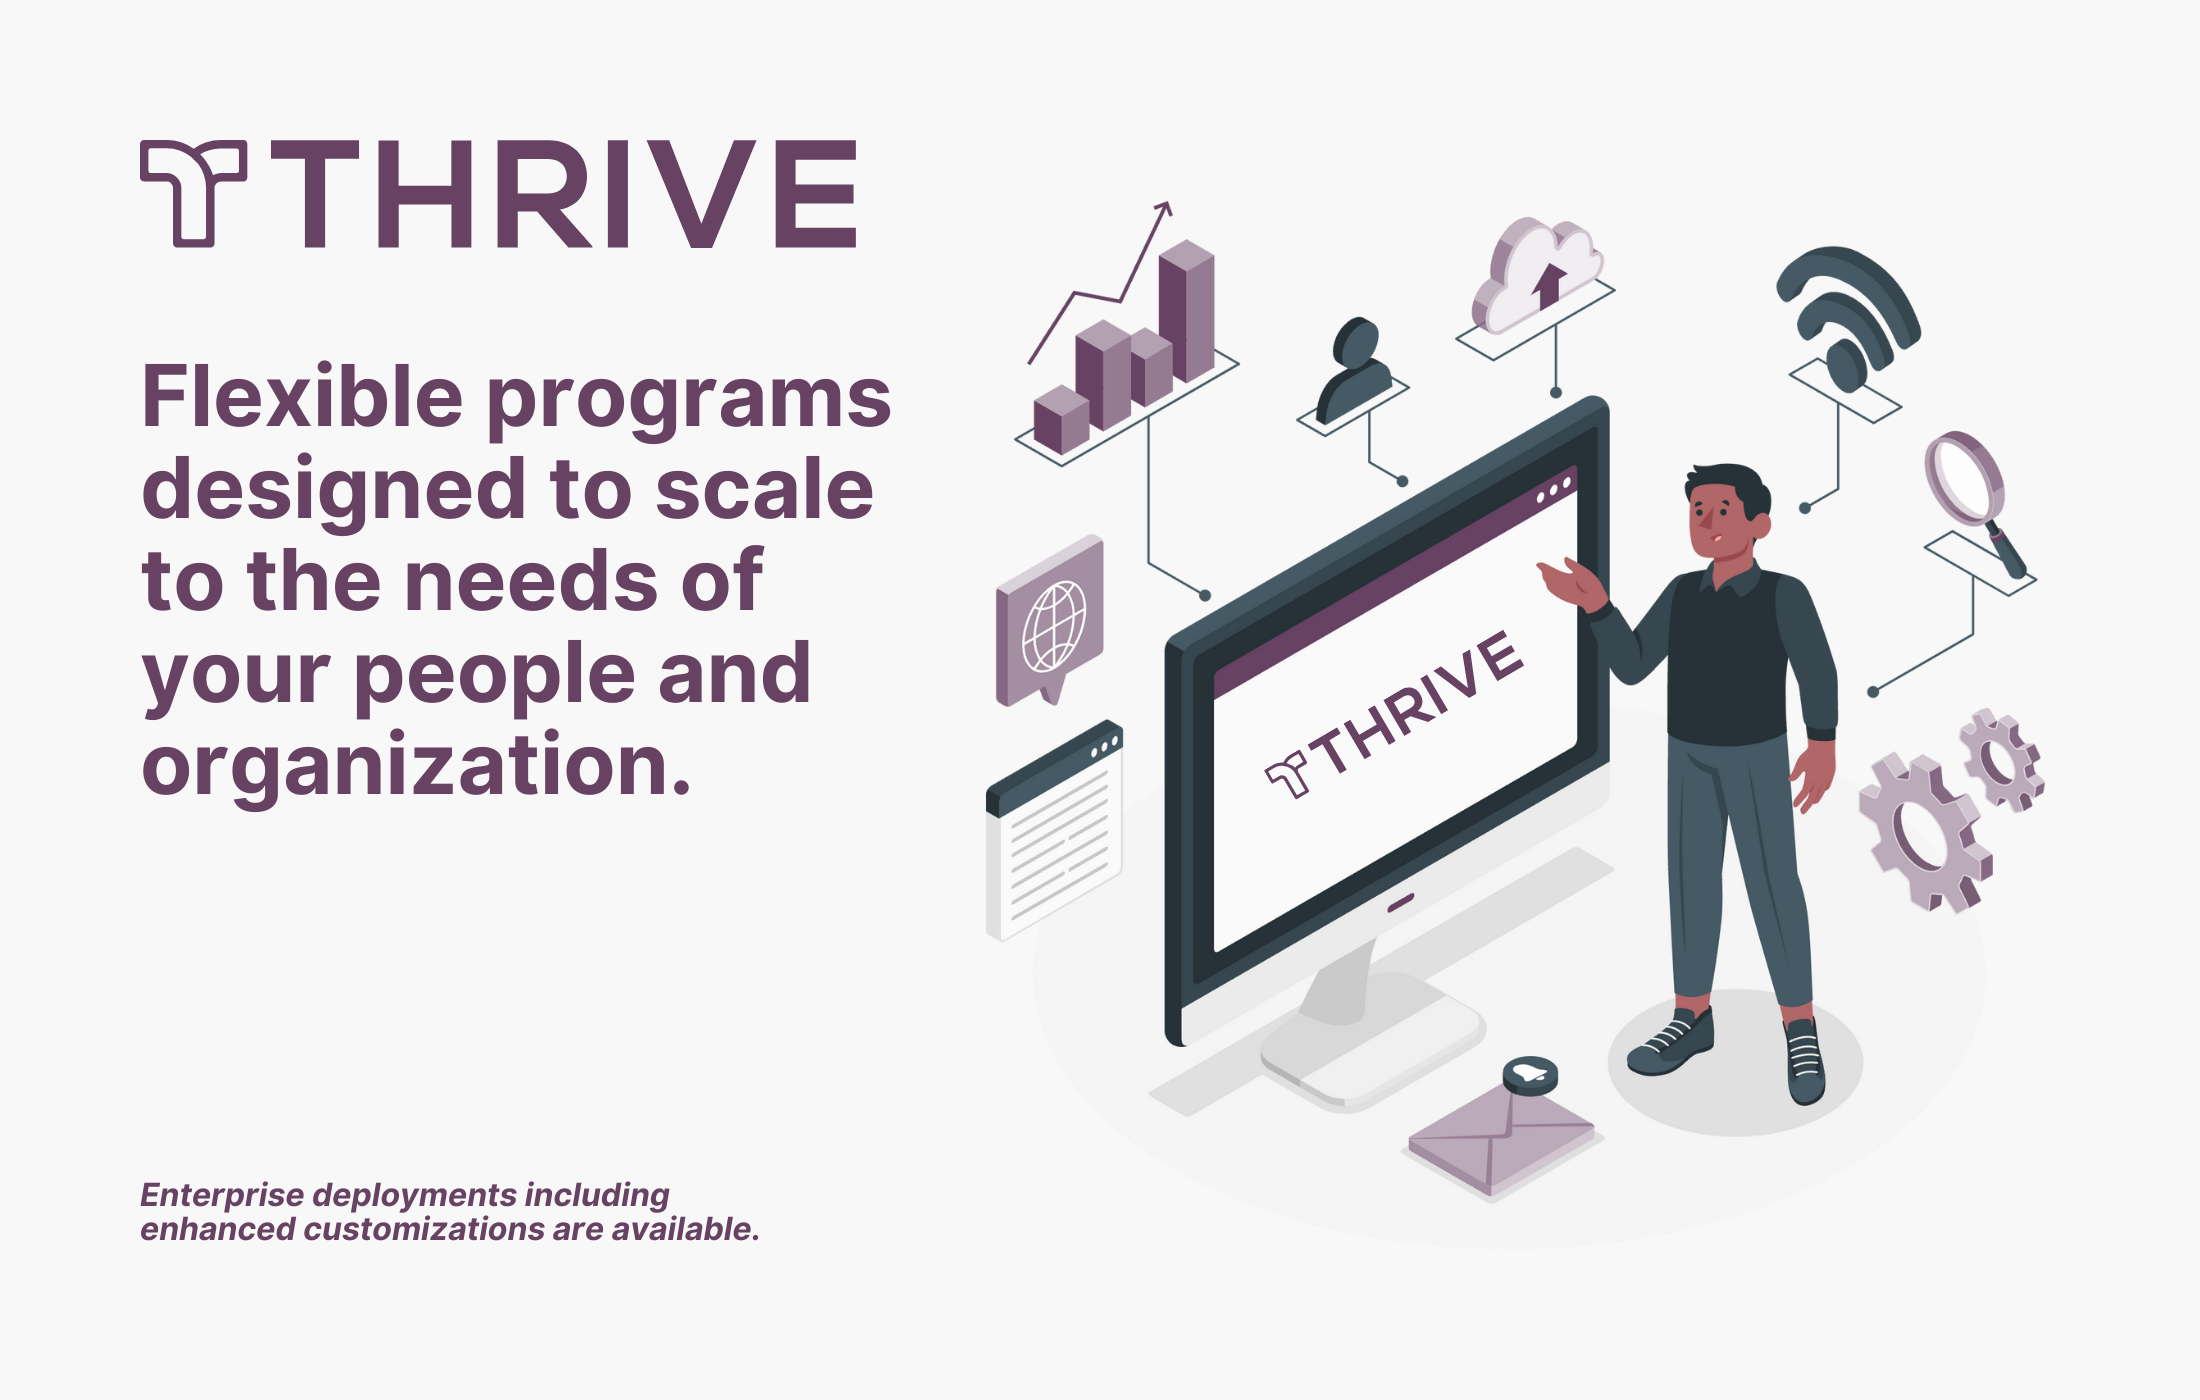 Thrive offers a broad array of tools catered to the unique needs of individuals affected by layoffs to ensure the best outcomes for all.